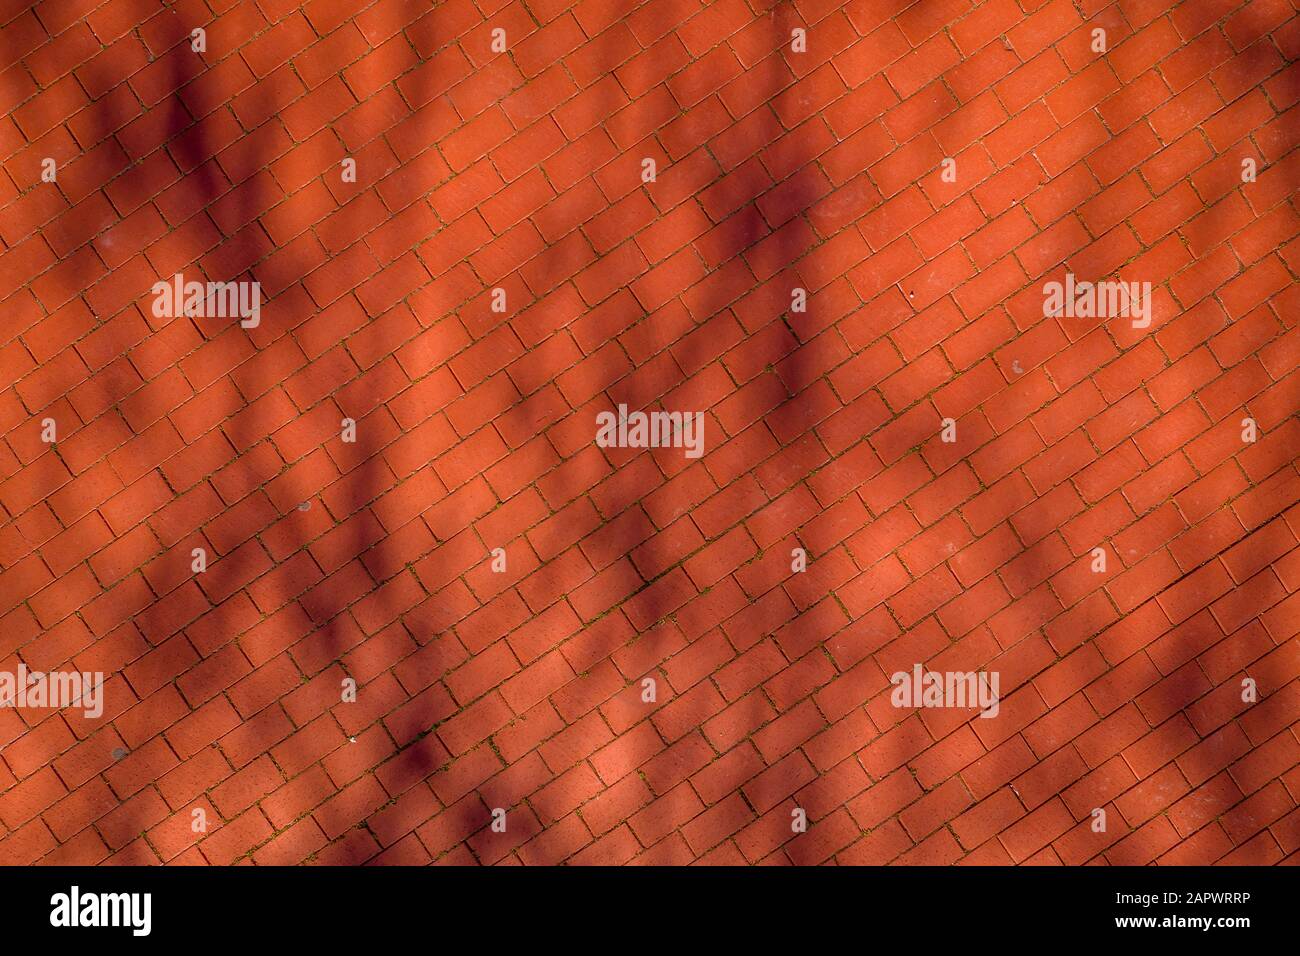 Red orange brick sidewalk pattern from the air with shadows of branches Stock Photo